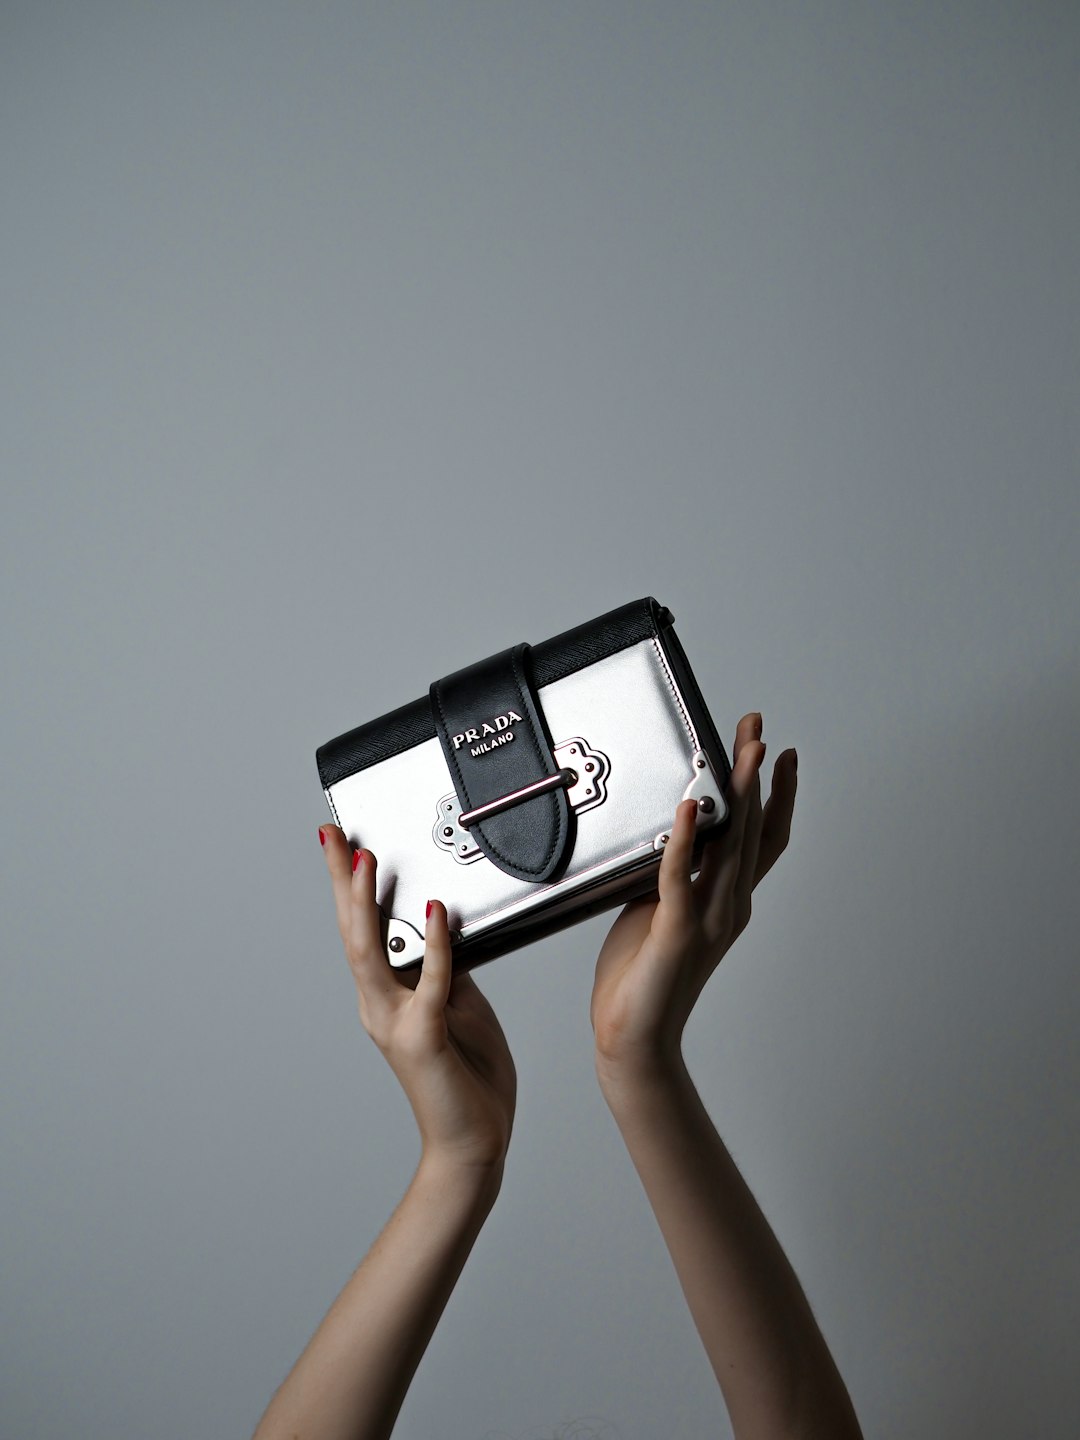 person holding black and white digital device